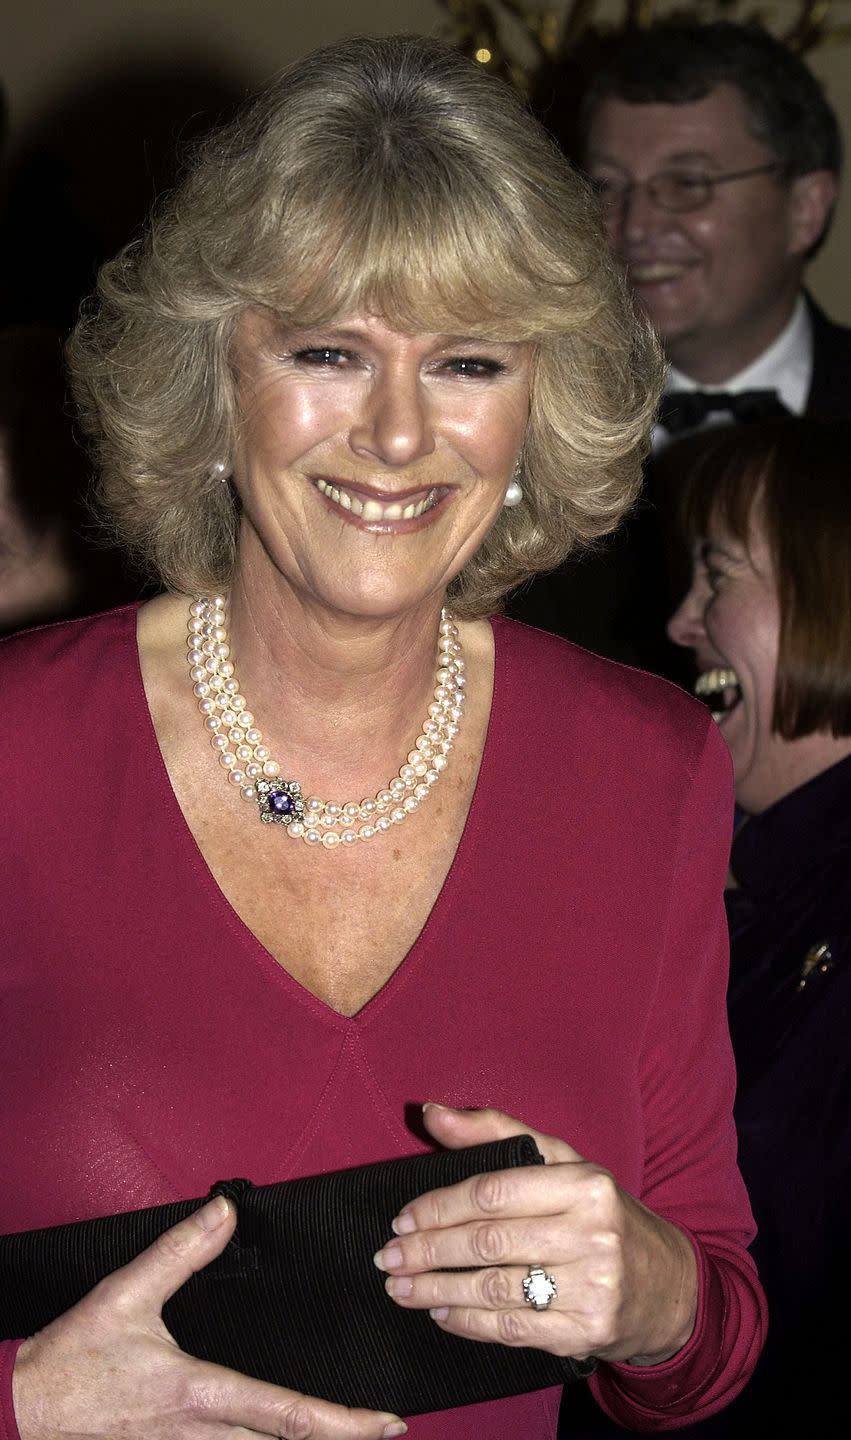 <p>Prince Charles proposed to Camilla with a diamond ring that was previously owned by his grandmother, the Queen Mother. It boasts a five-carat emerald-cut diamond in an Art Deco setting. It is believed to have been given to her after welcoming her first child, now the Queen.</p>